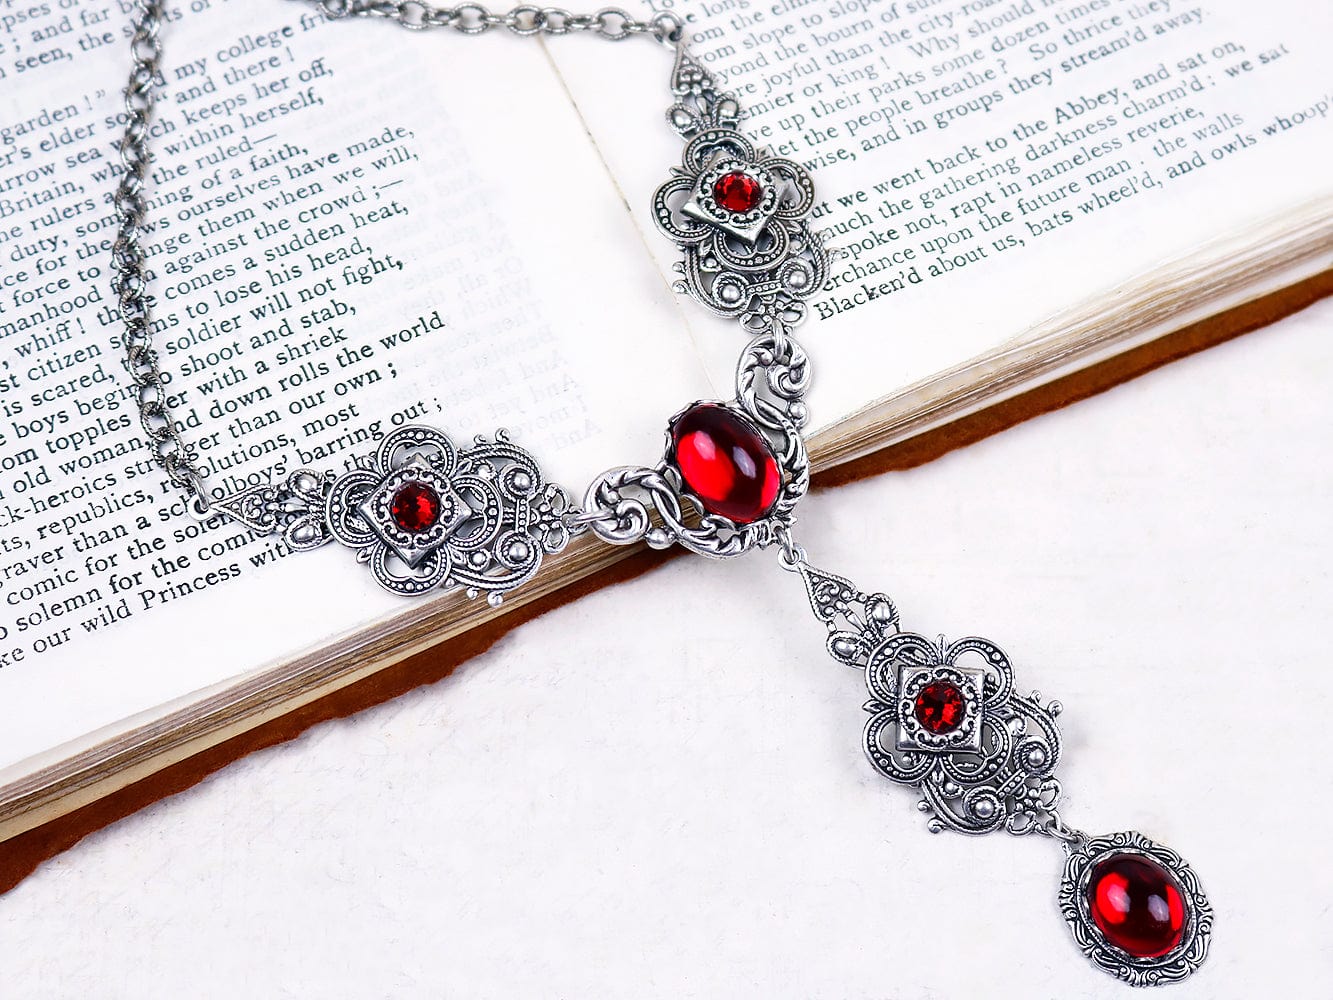 Avalon Ornate Necklace in Ruby and Antiqued Silver by Rabbitwood and Reason